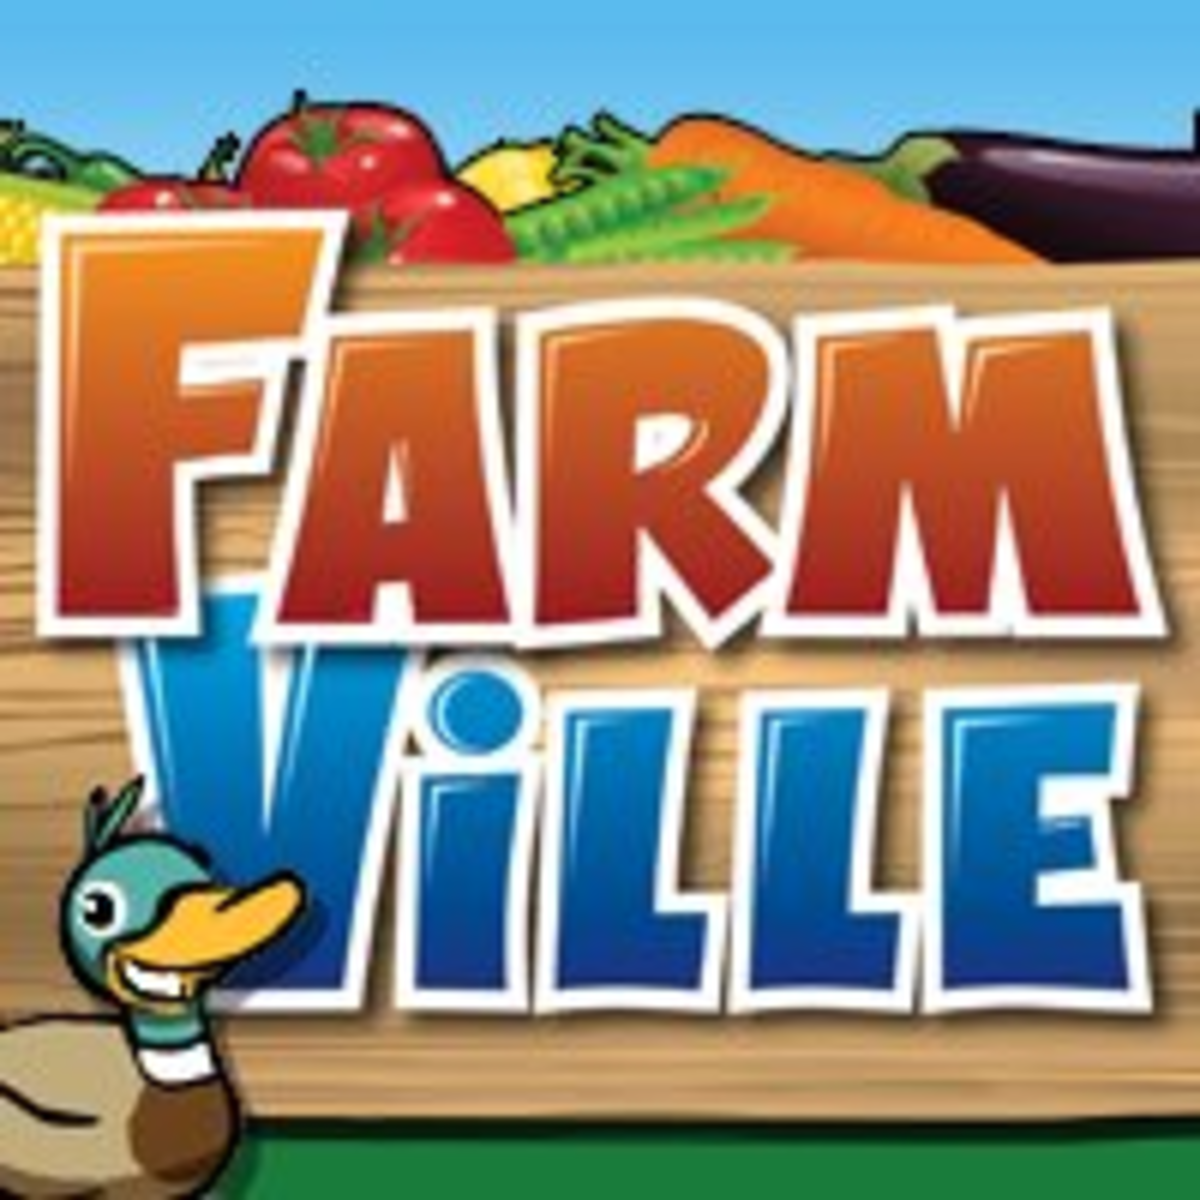 8 Games Like FarmVille - Other Farm and Social Games